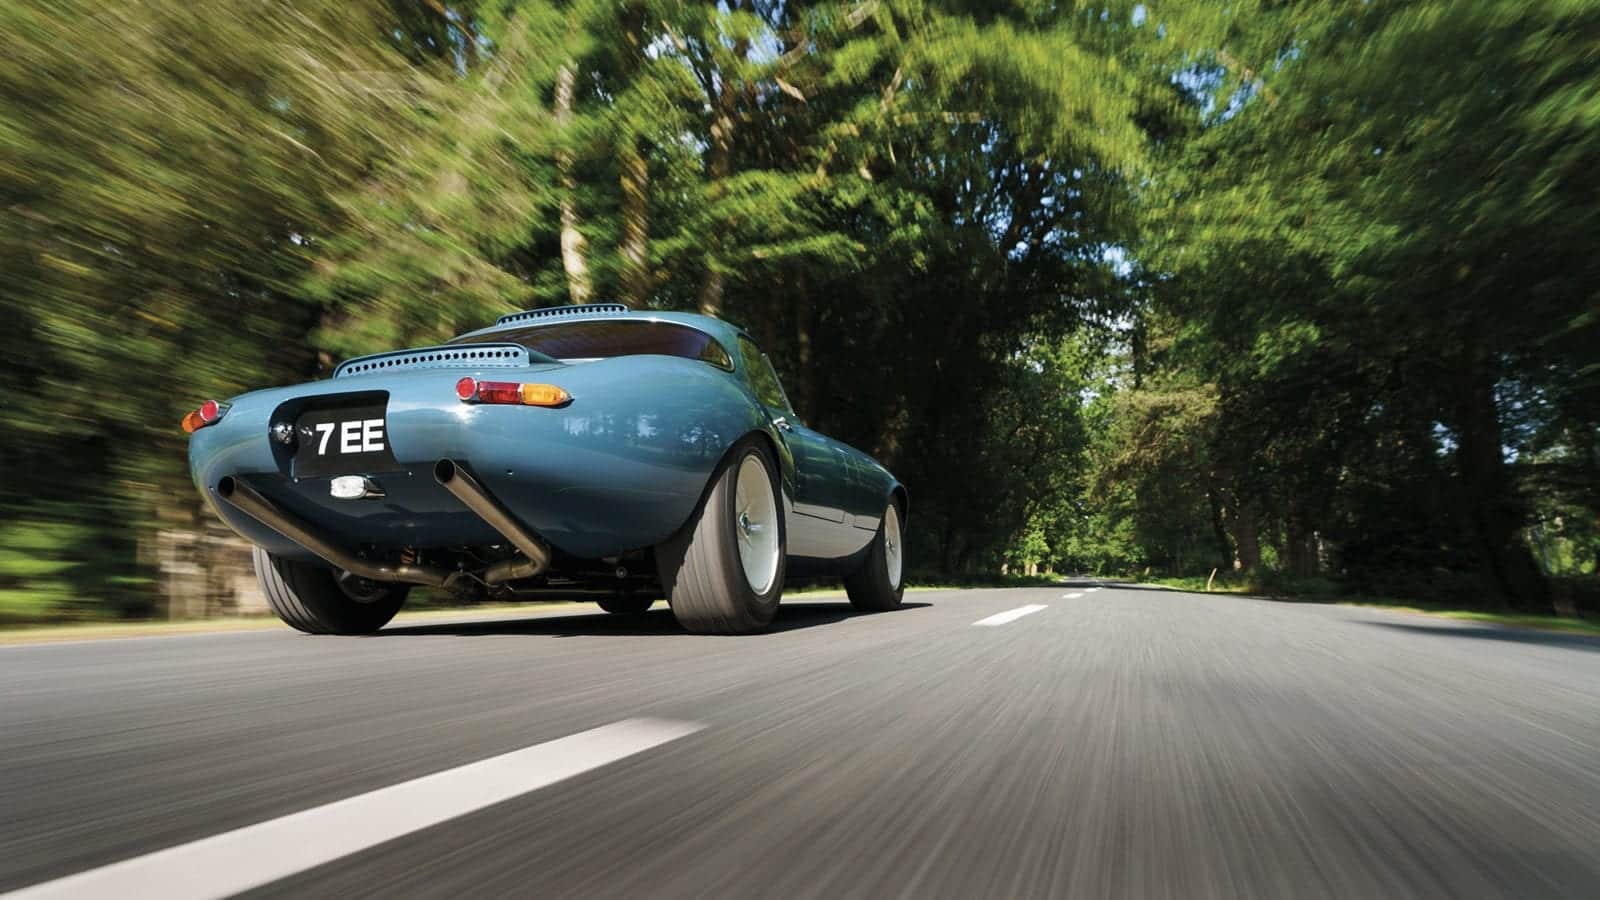 Rear shot of the 2020 Eagle E-type Lightweight GT and its exhaust pipes ona. country road